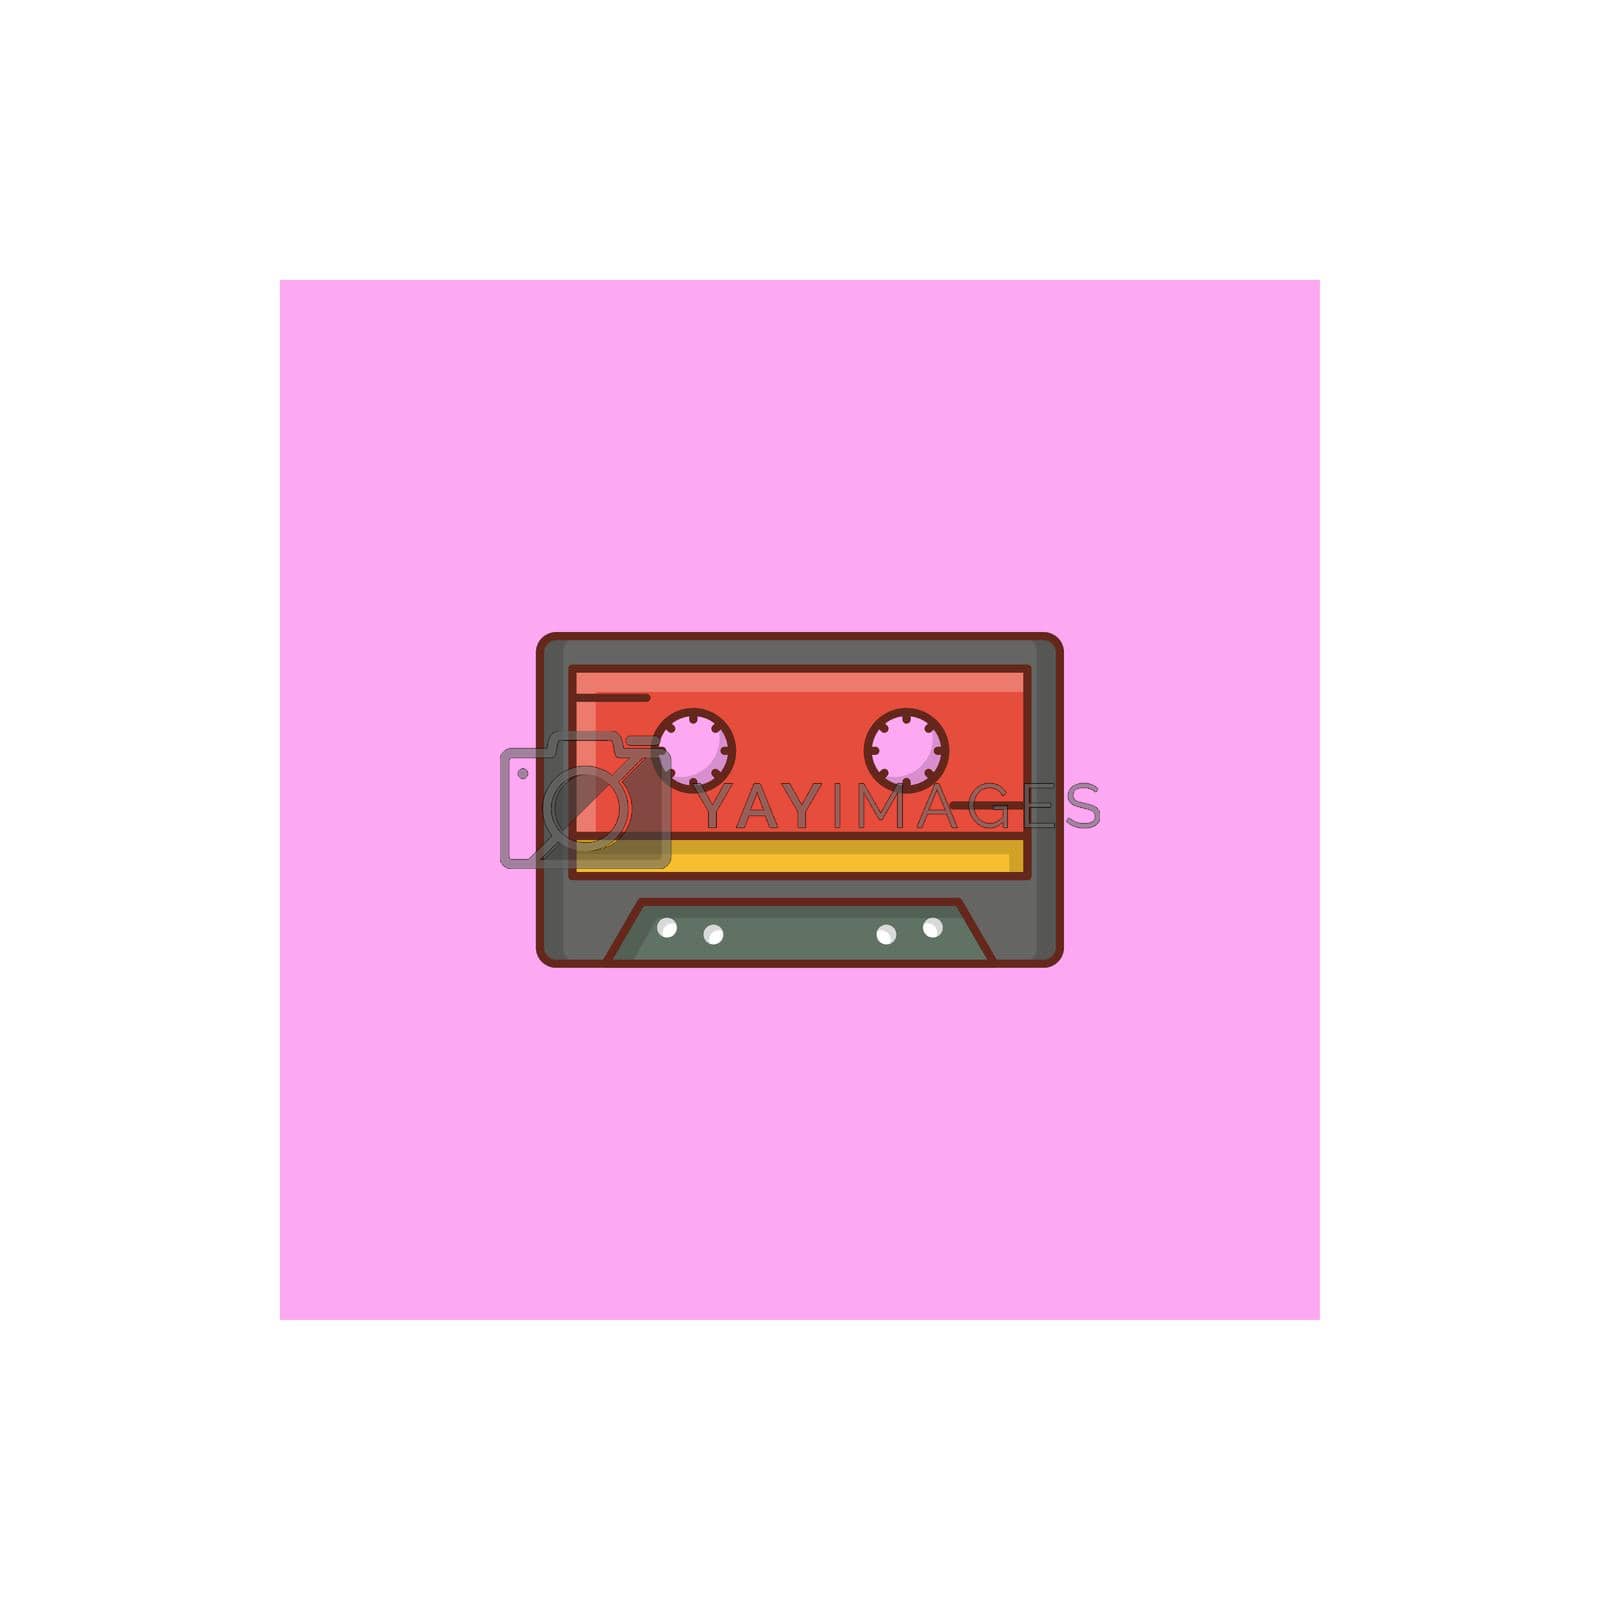 Royalty free image of cassette by FlaticonsDesign